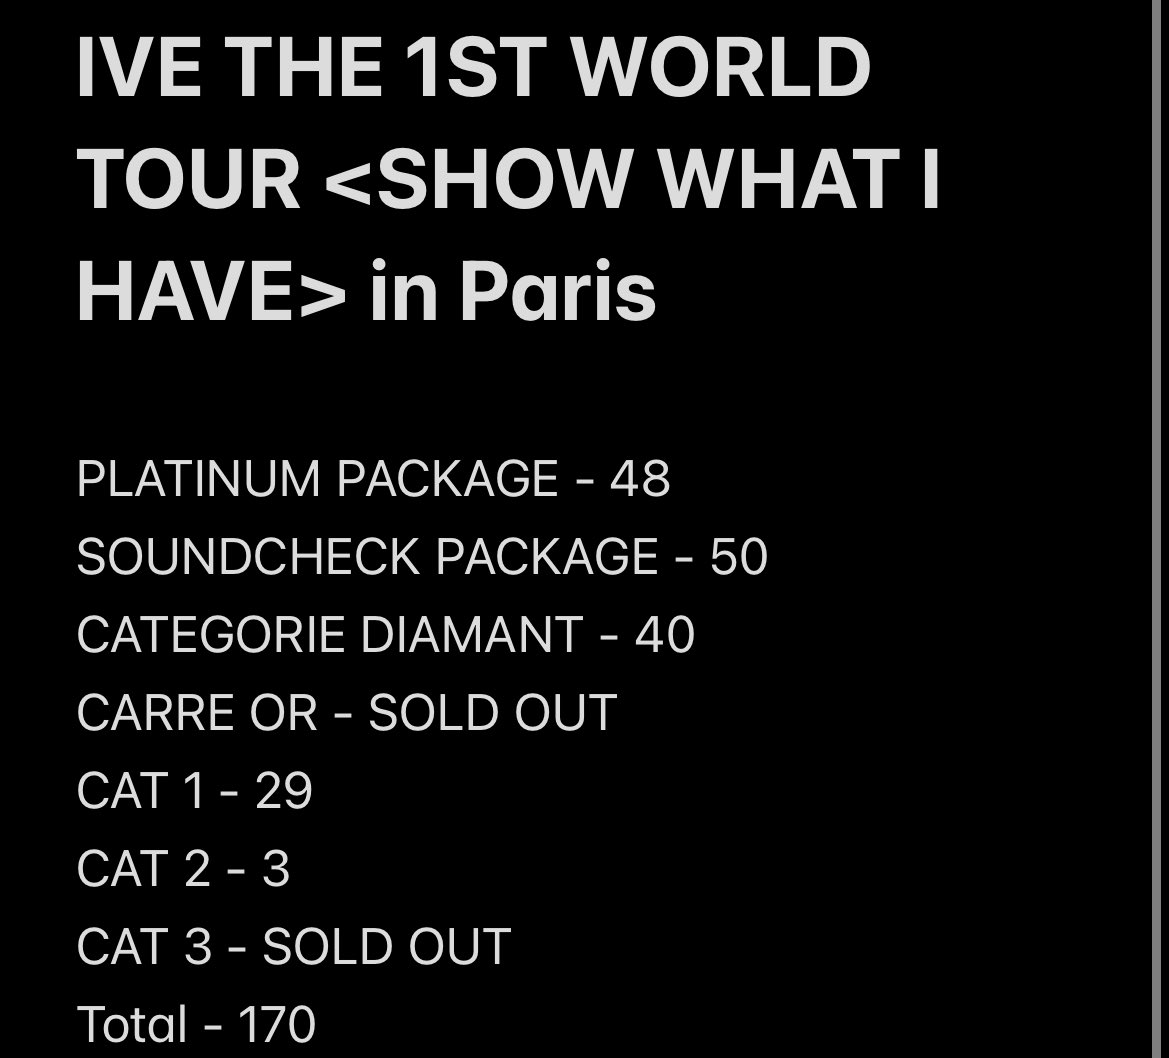 IVE THE 1ST WORLD TOUR <SHOW WHAT I HAVE> in Paris Ticket Availability update. (D-24)

Limited seat left DIVES!!! 24 days until IVE is starting its World tour in Paris 💖

#IVE_WORLD_TOUR #SHOW_WHAT_I_HAVE